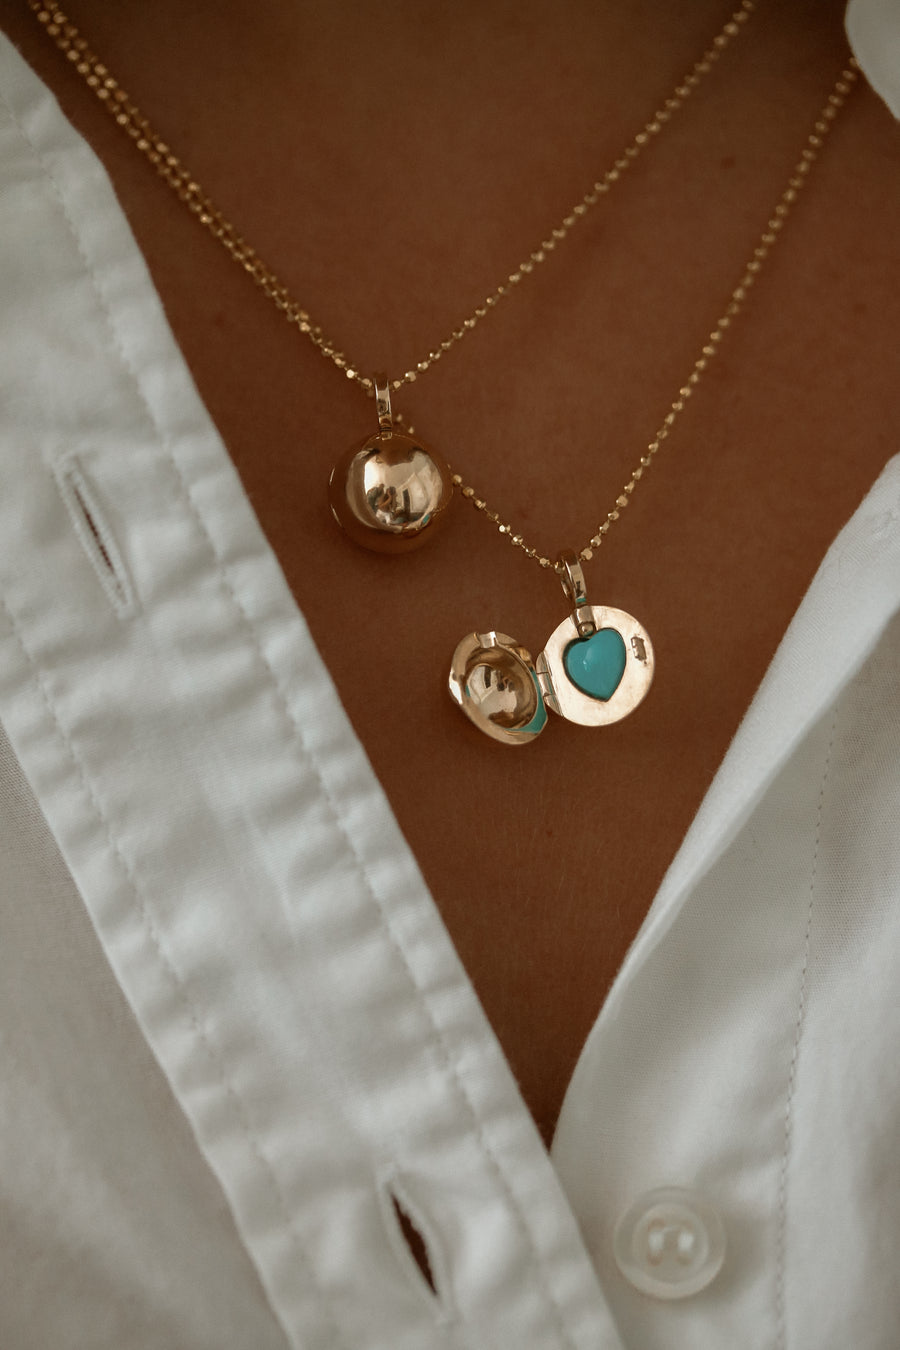 14k ball locket necklace adorned with a captivating turquoise heart center stone, exuding charm and elegance. This unique piece features a spherical locket design, complemented by the vibrant turquoise heart at its center. The rich blue-green hue of the turquoise stone adds a pop of color and sophistication to the understated beauty of the gold locket, making it a stunning addition to any jewelry collection.